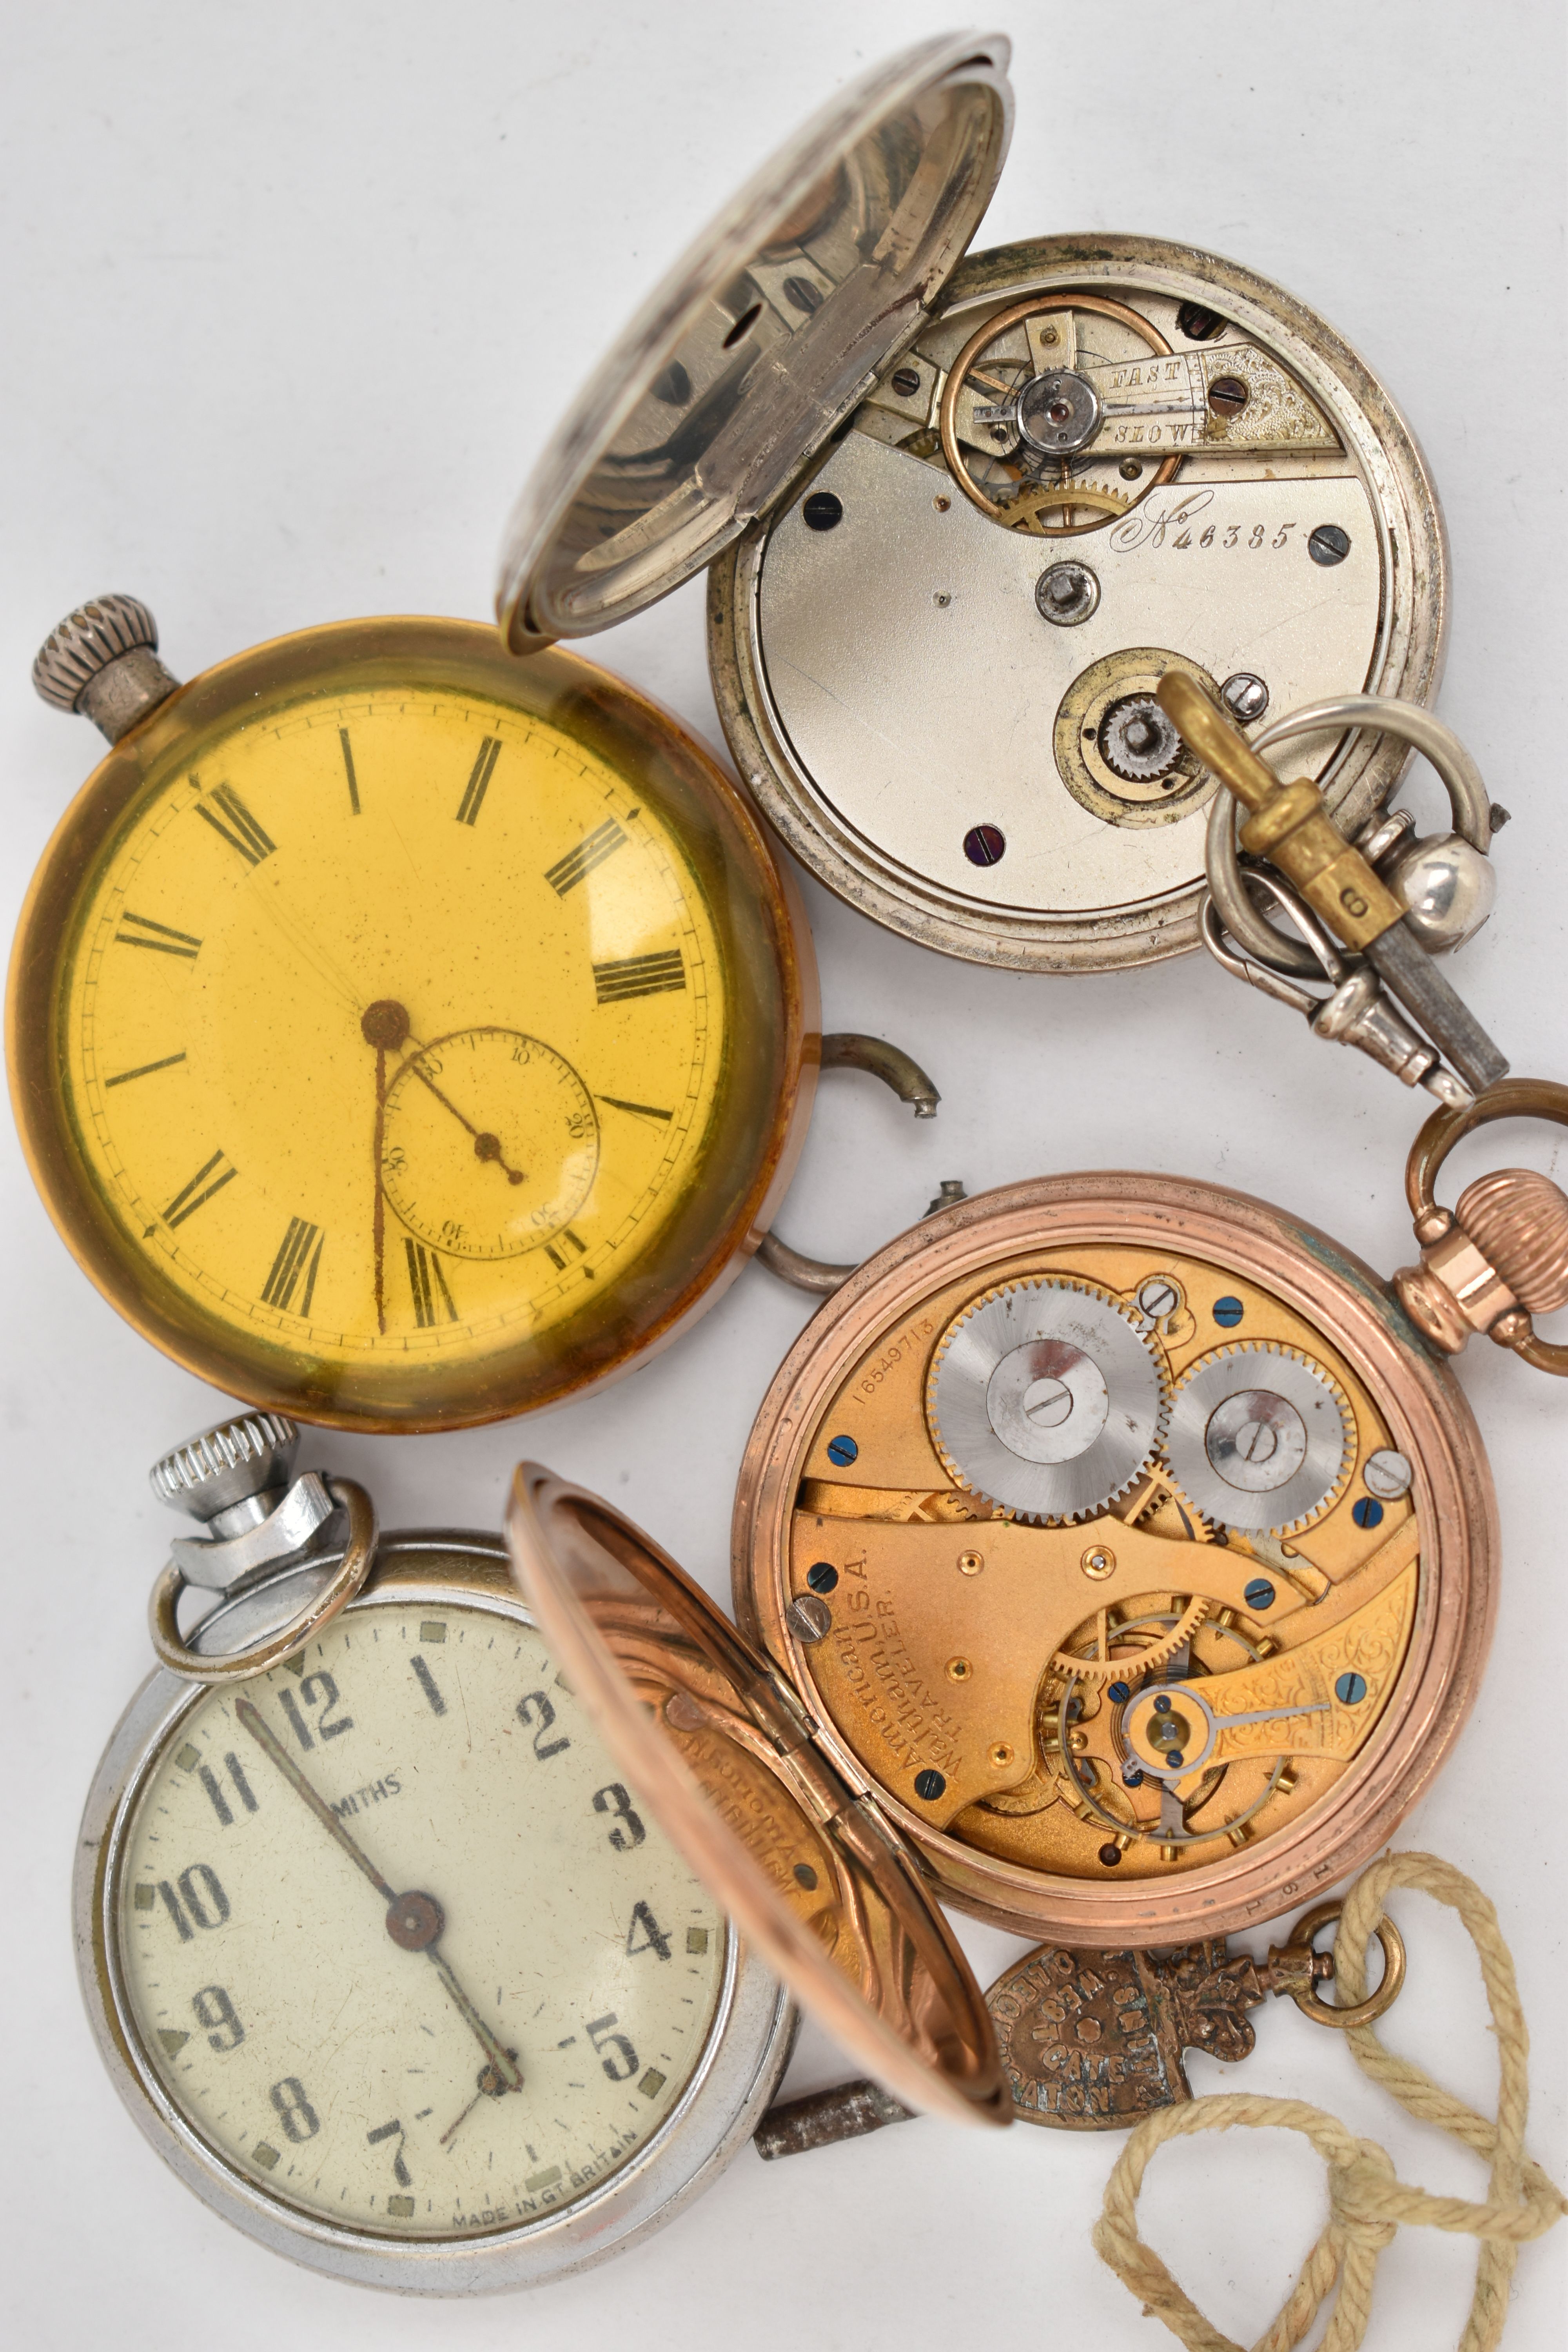 FOUR POCKET WATCHES, to include a gold plated open face pocket watch, manual wind, round white - Image 3 of 3